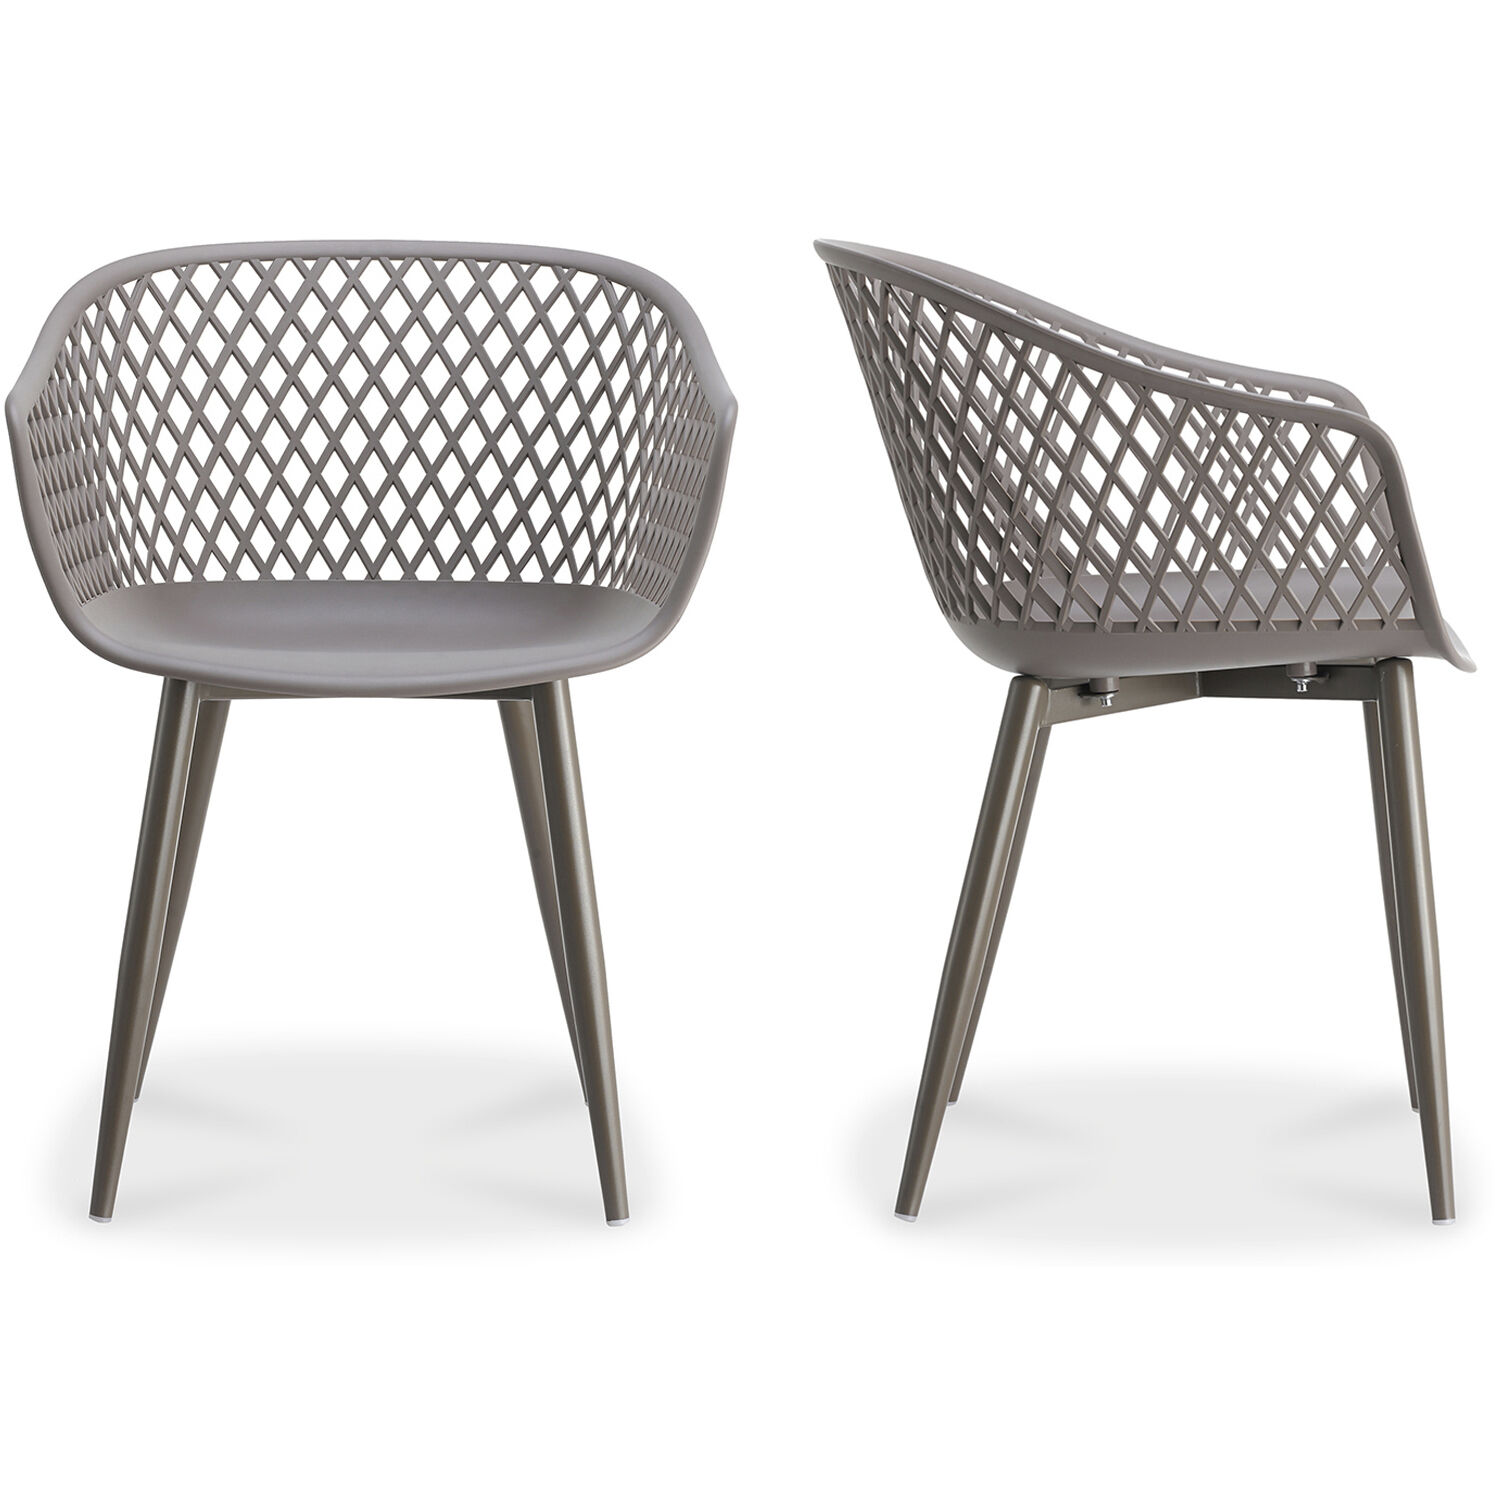 Piazza Grey Outdoor Chair